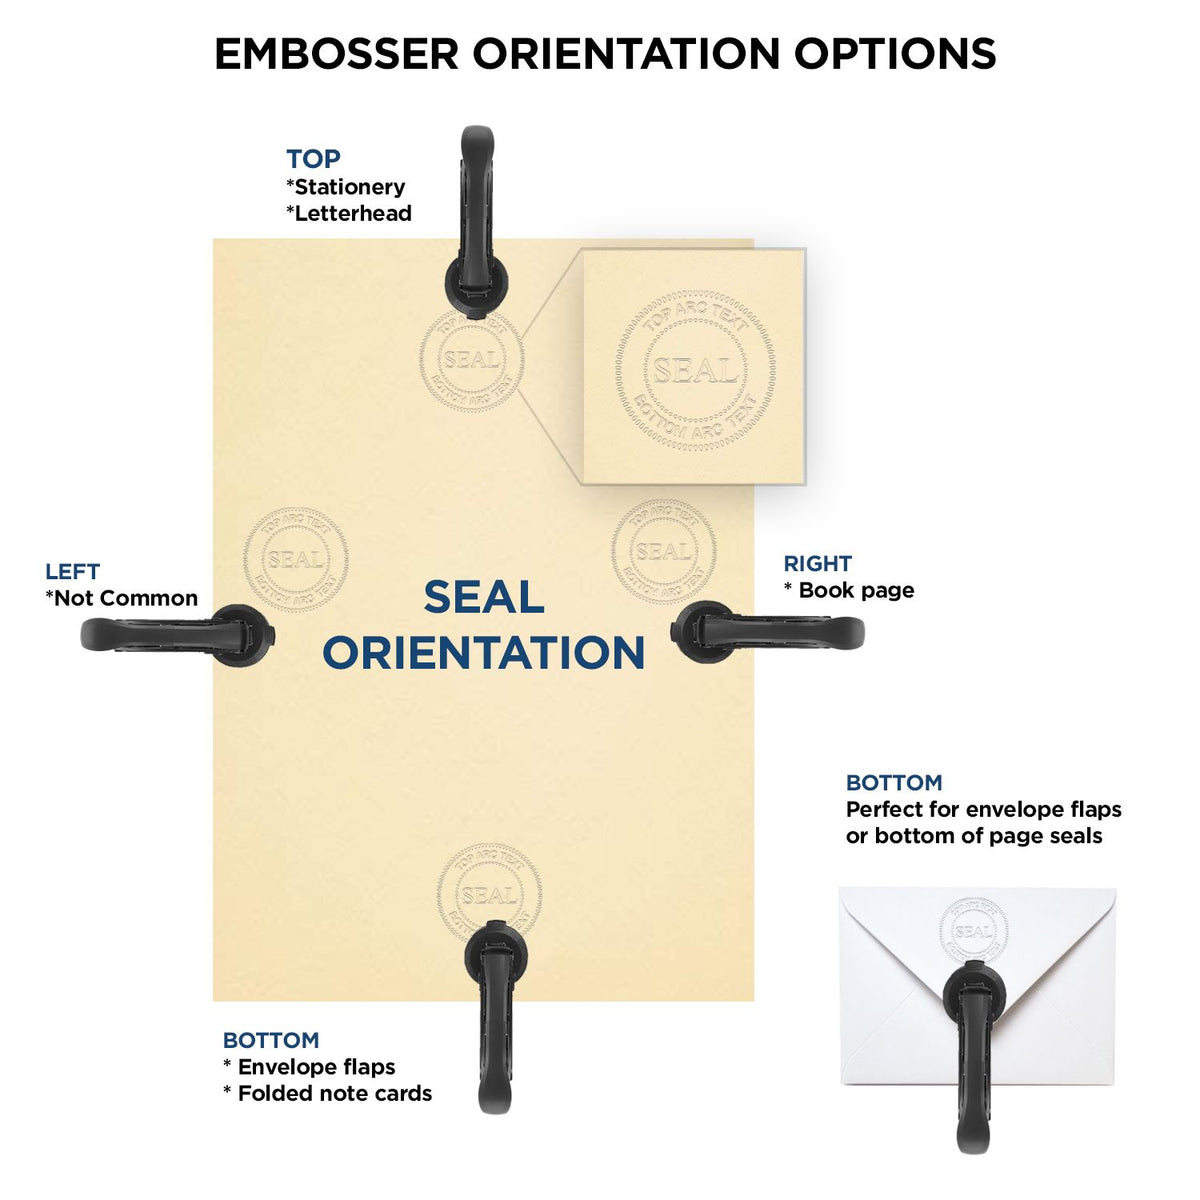 An infographic for the Extended Long Reach Arkansas Surveyor Embosser showing embosser orientation, this is showing examples of a top, bottom, right and left insert.